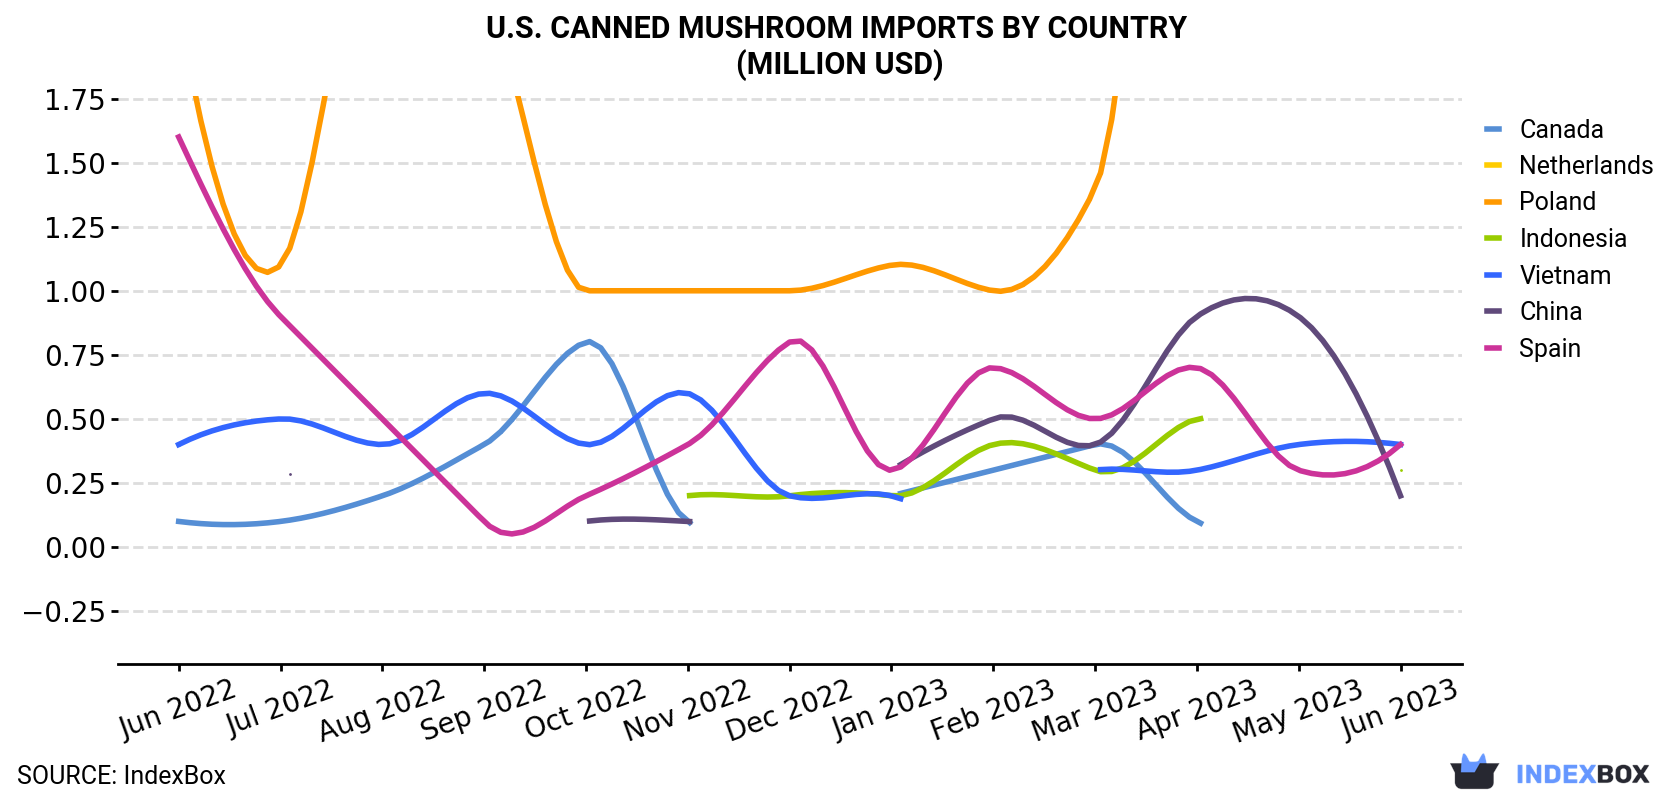 U.S. Canned Mushroom Imports By Country (Million USD)